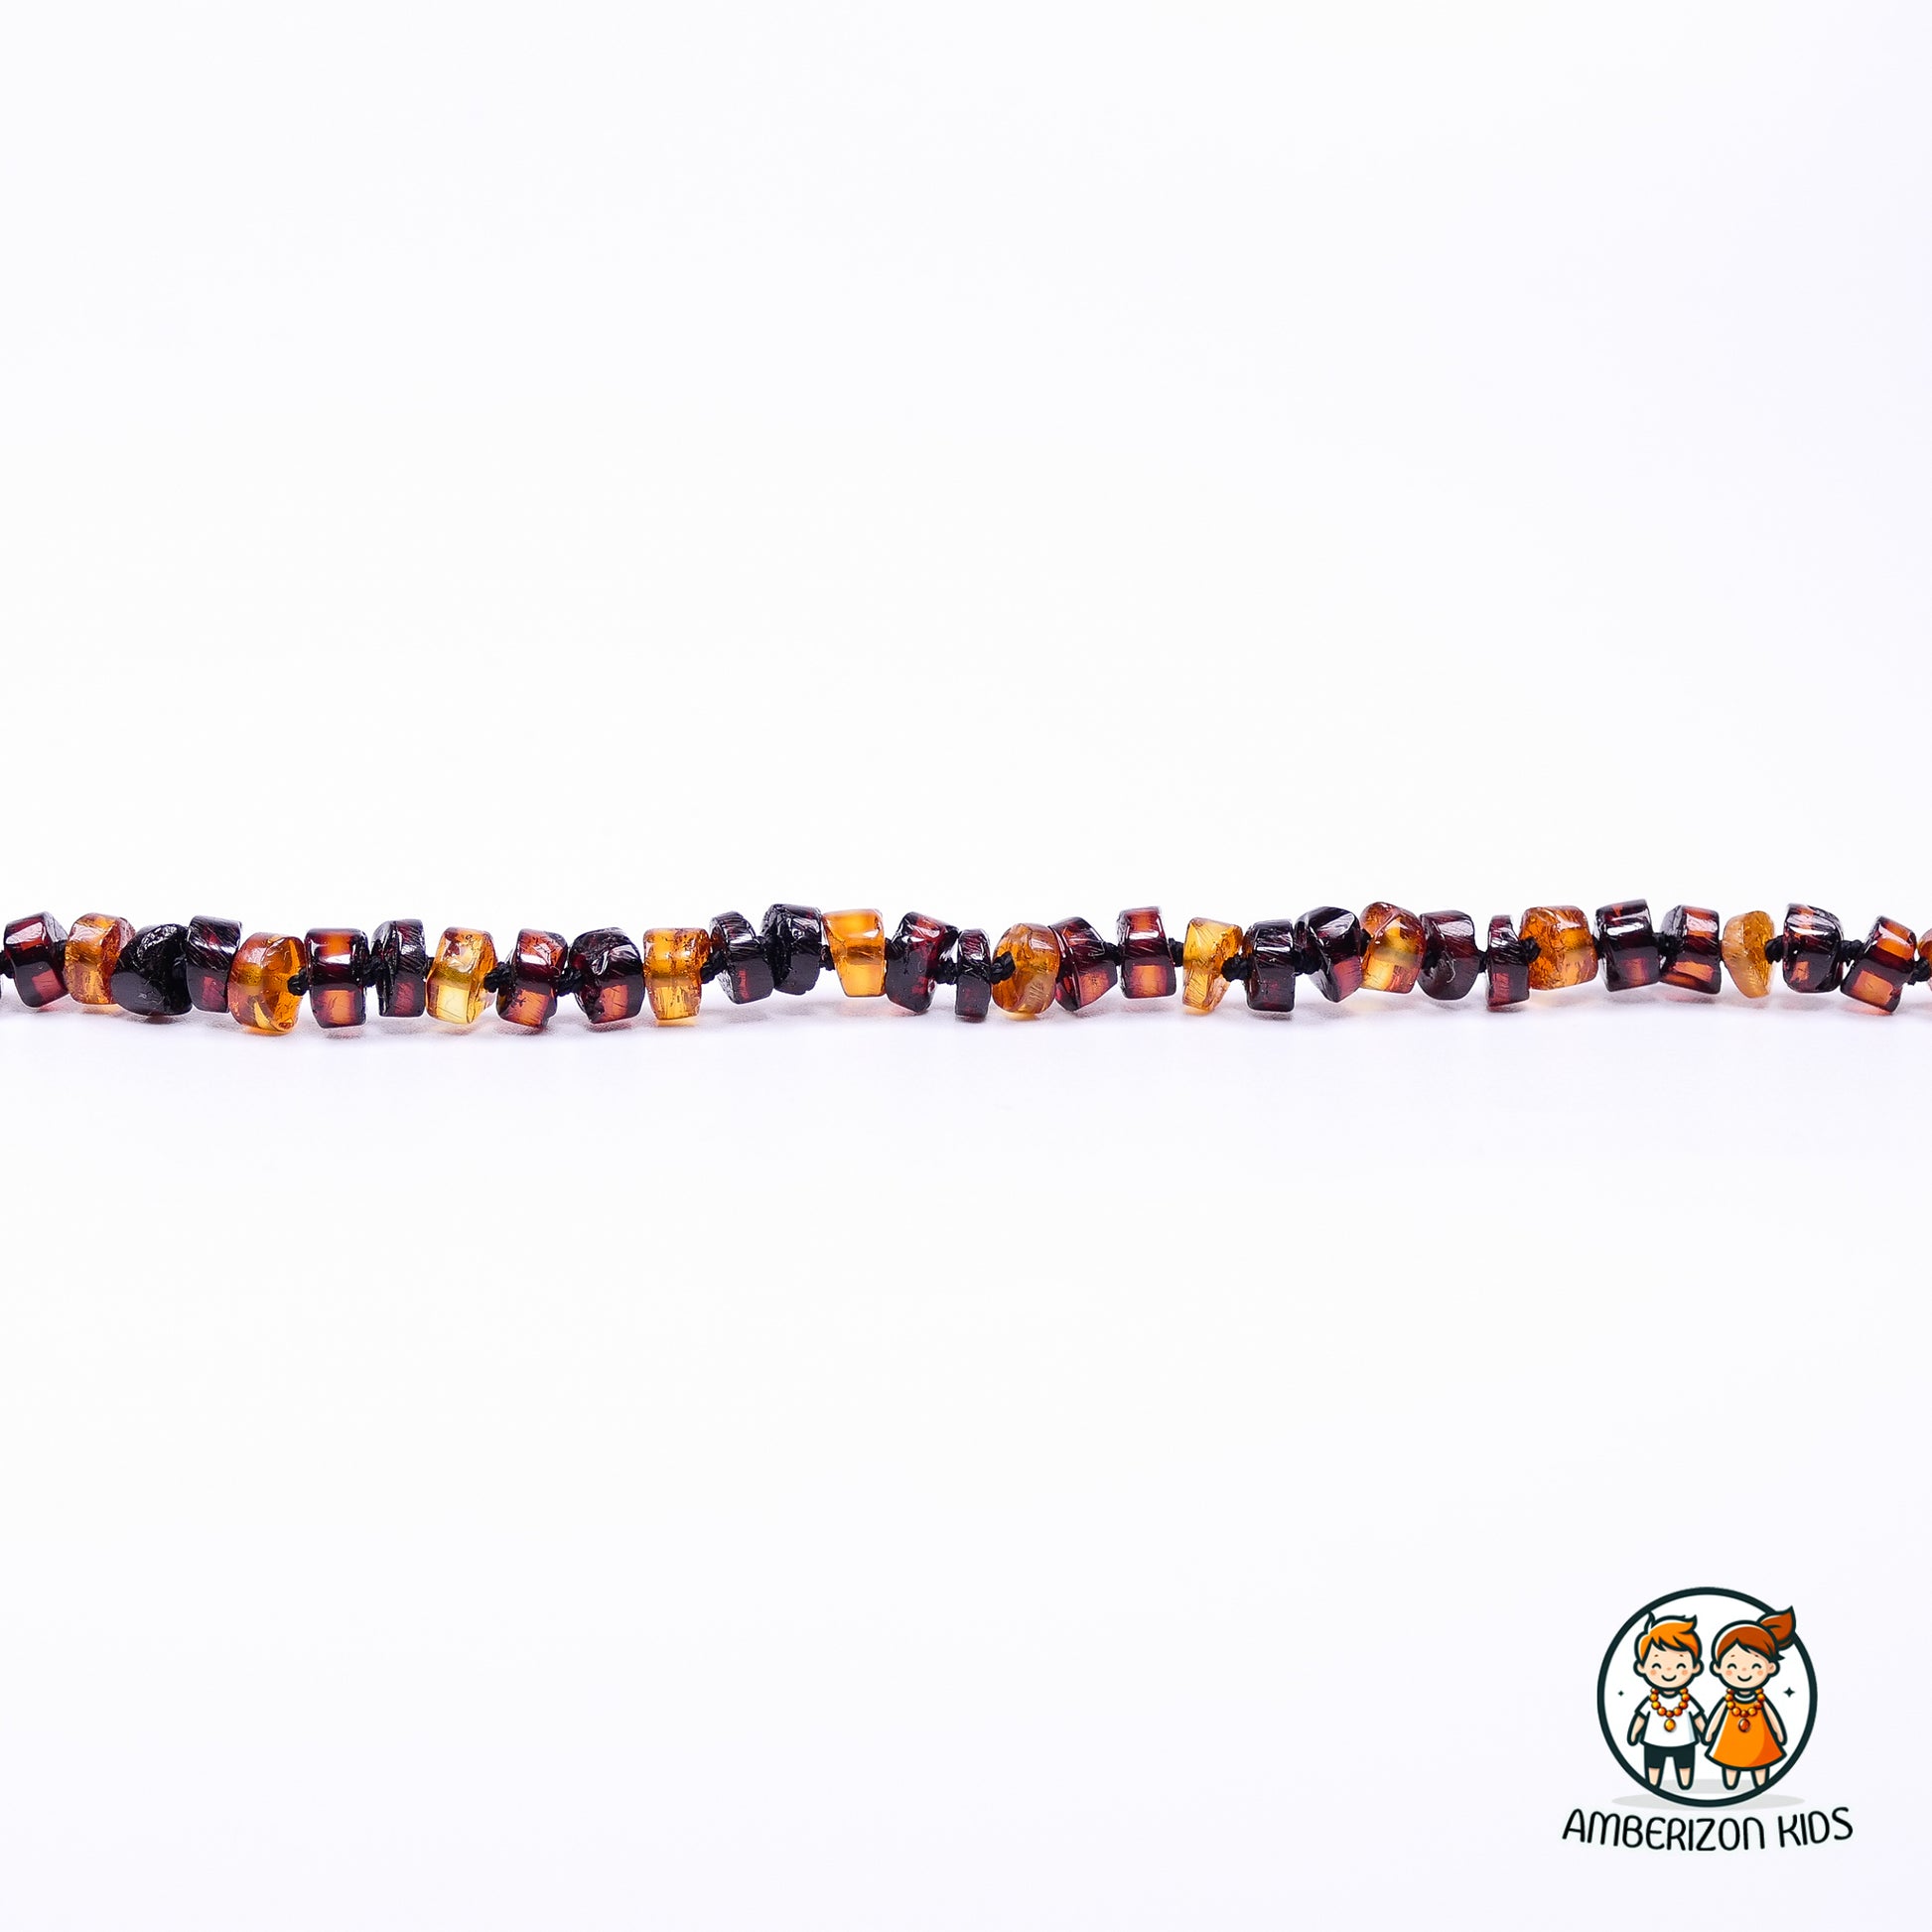 Cylinder bead Baltic amber baby necklace - Smooth polished amber beads